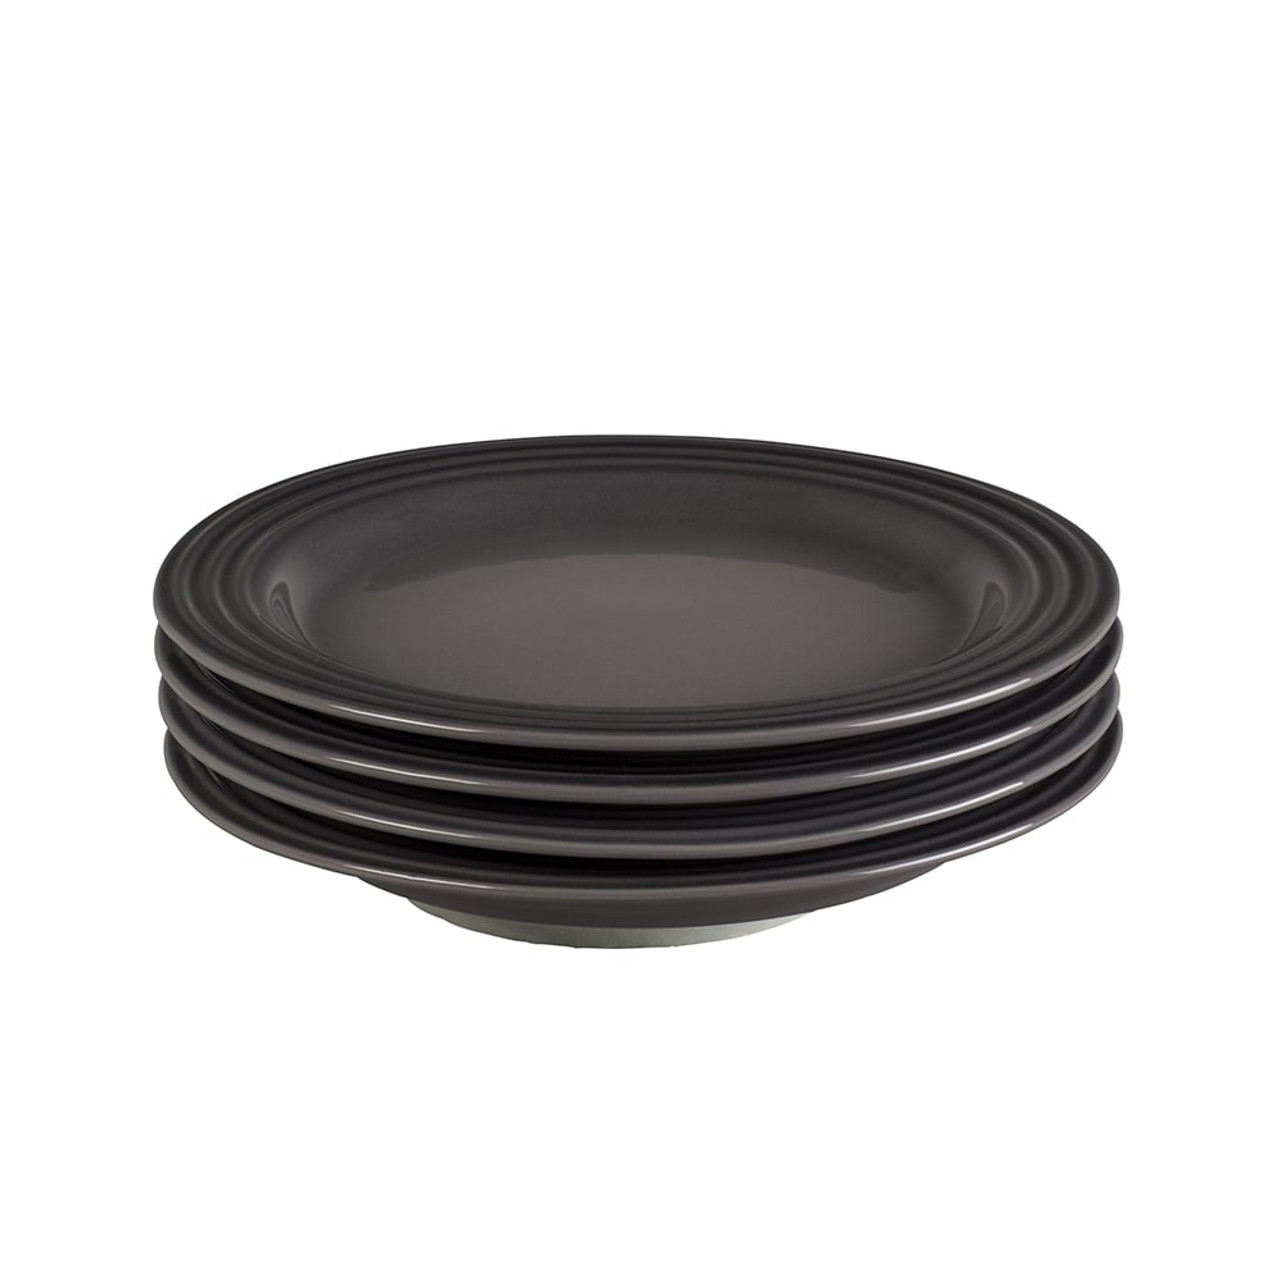 https://cdn11.bigcommerce.com/s-hccytny0od/images/stencil/1280x1280/products/2121/6877/le-creuset-salad-plates-oyster__95958.1539816273.jpg?c=2?imbypass=on